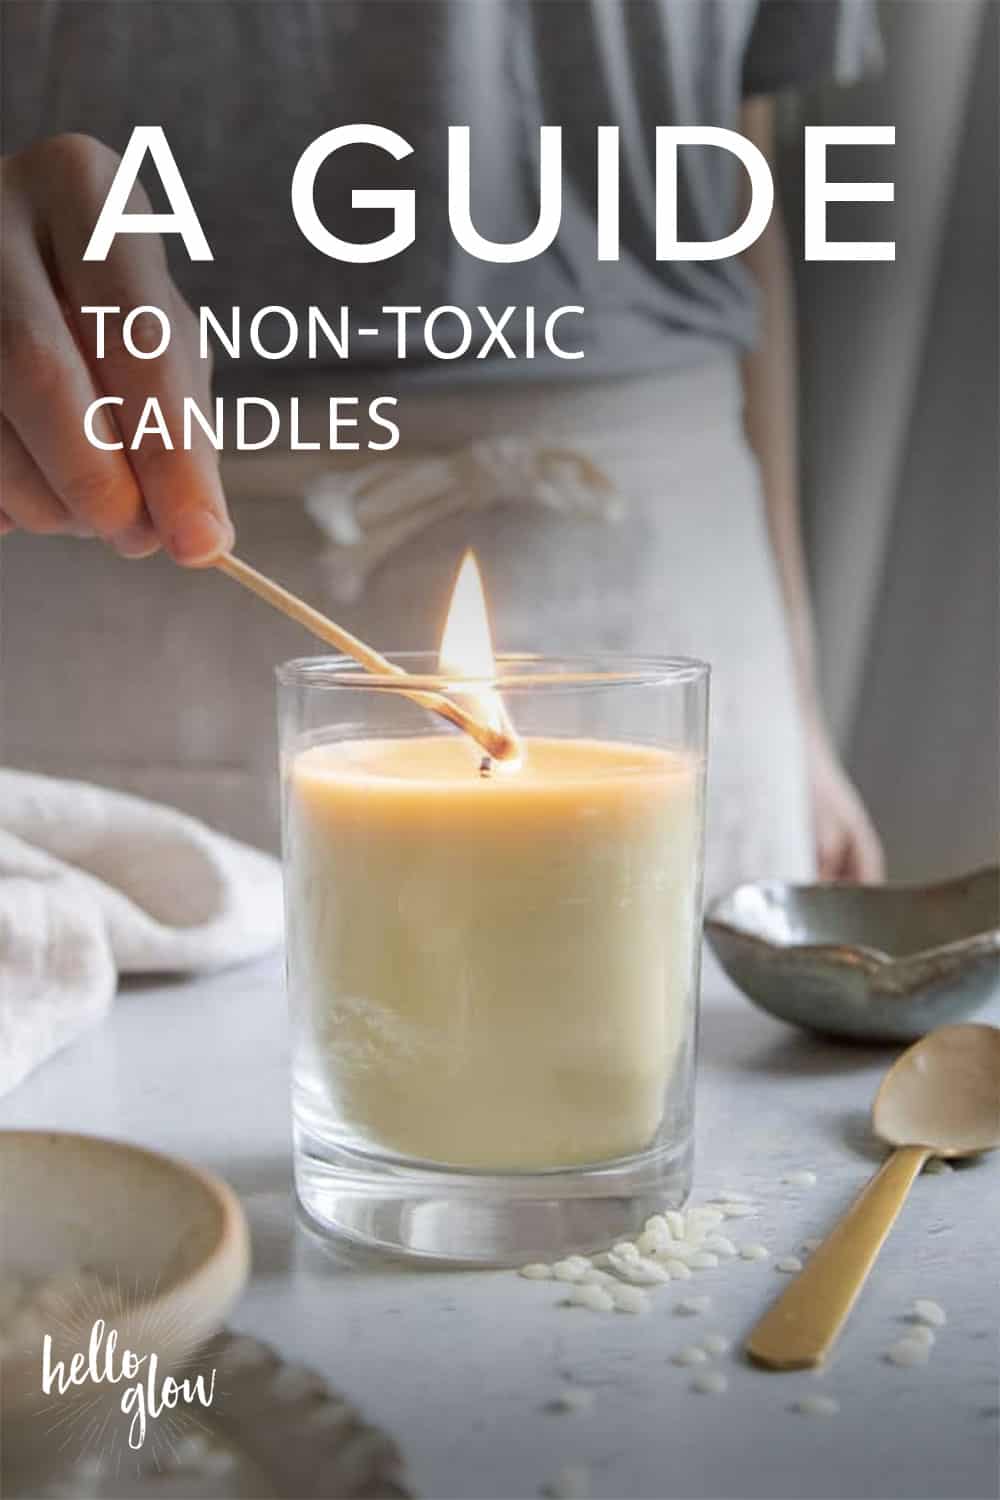 A Guide to Non-Toxic Candles